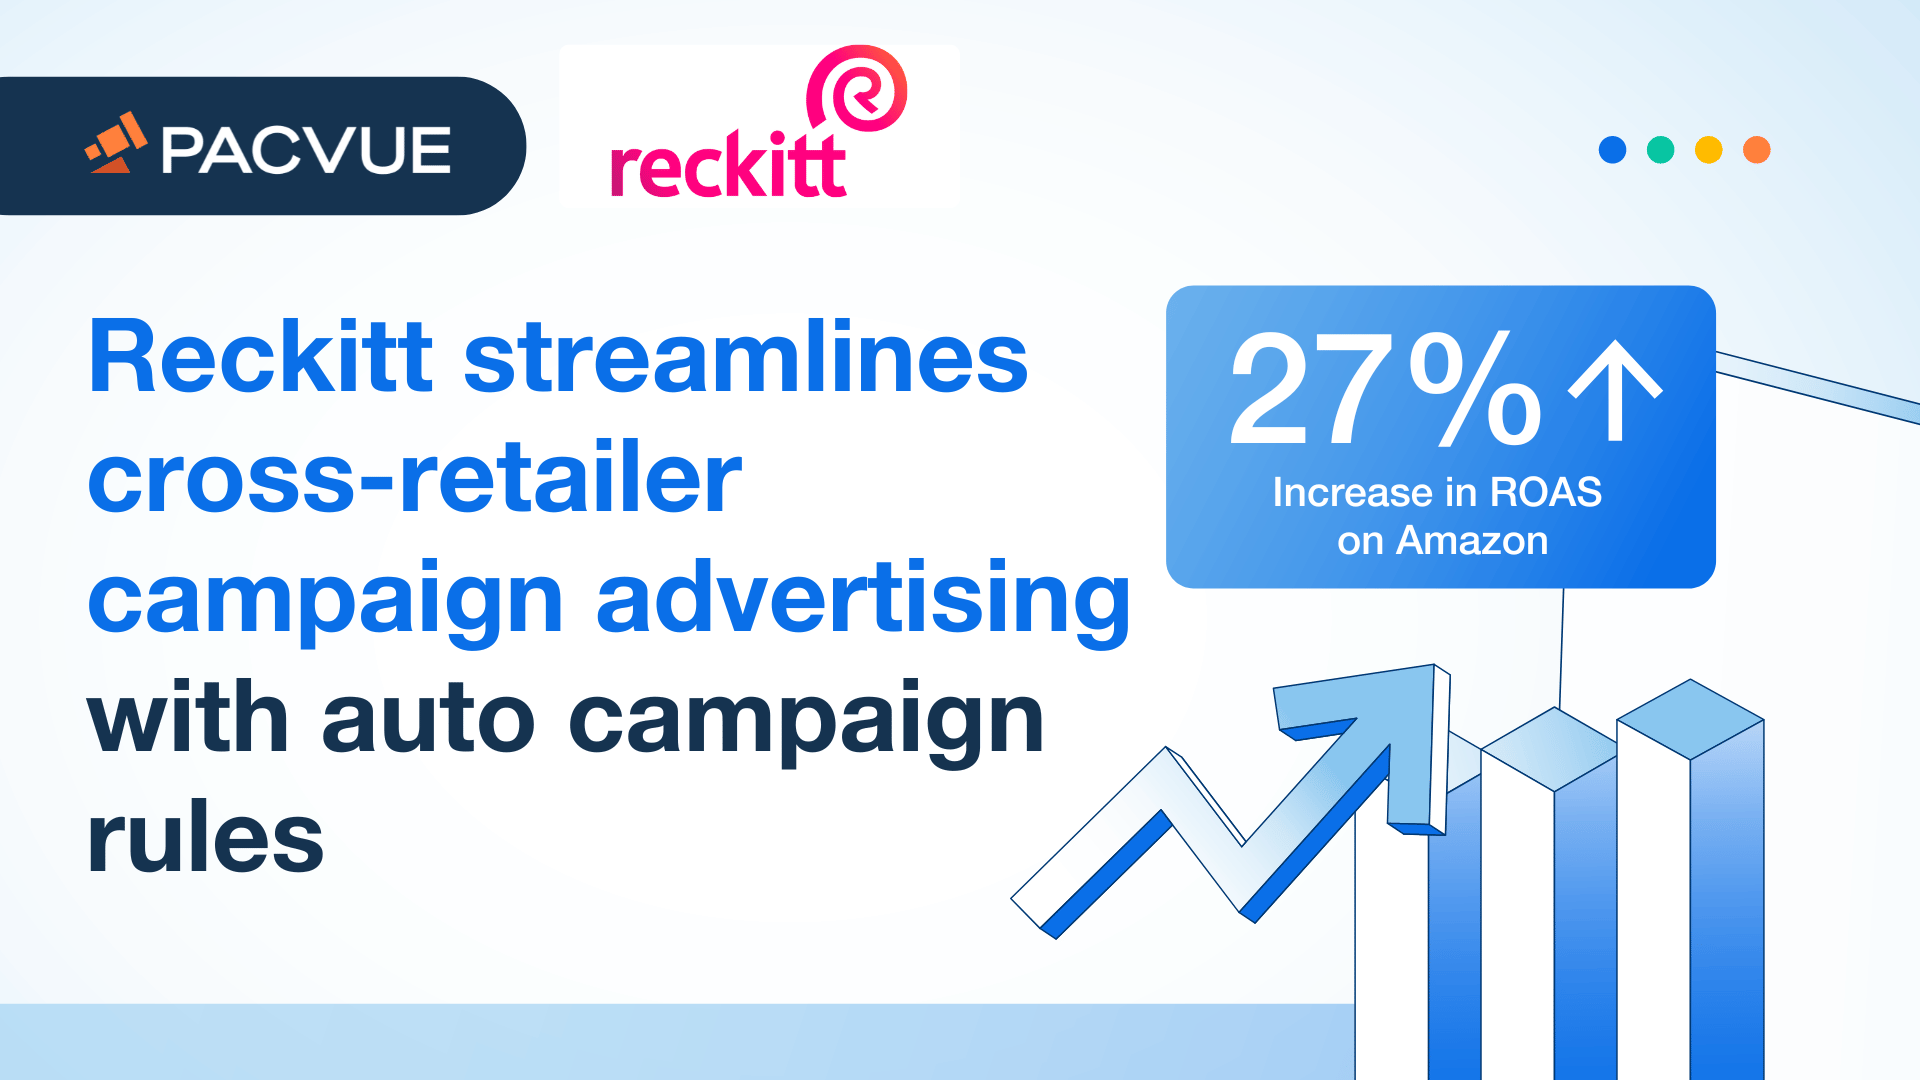 Reckitt streamlines cross-retailer campaign advertising with auto campaign rules